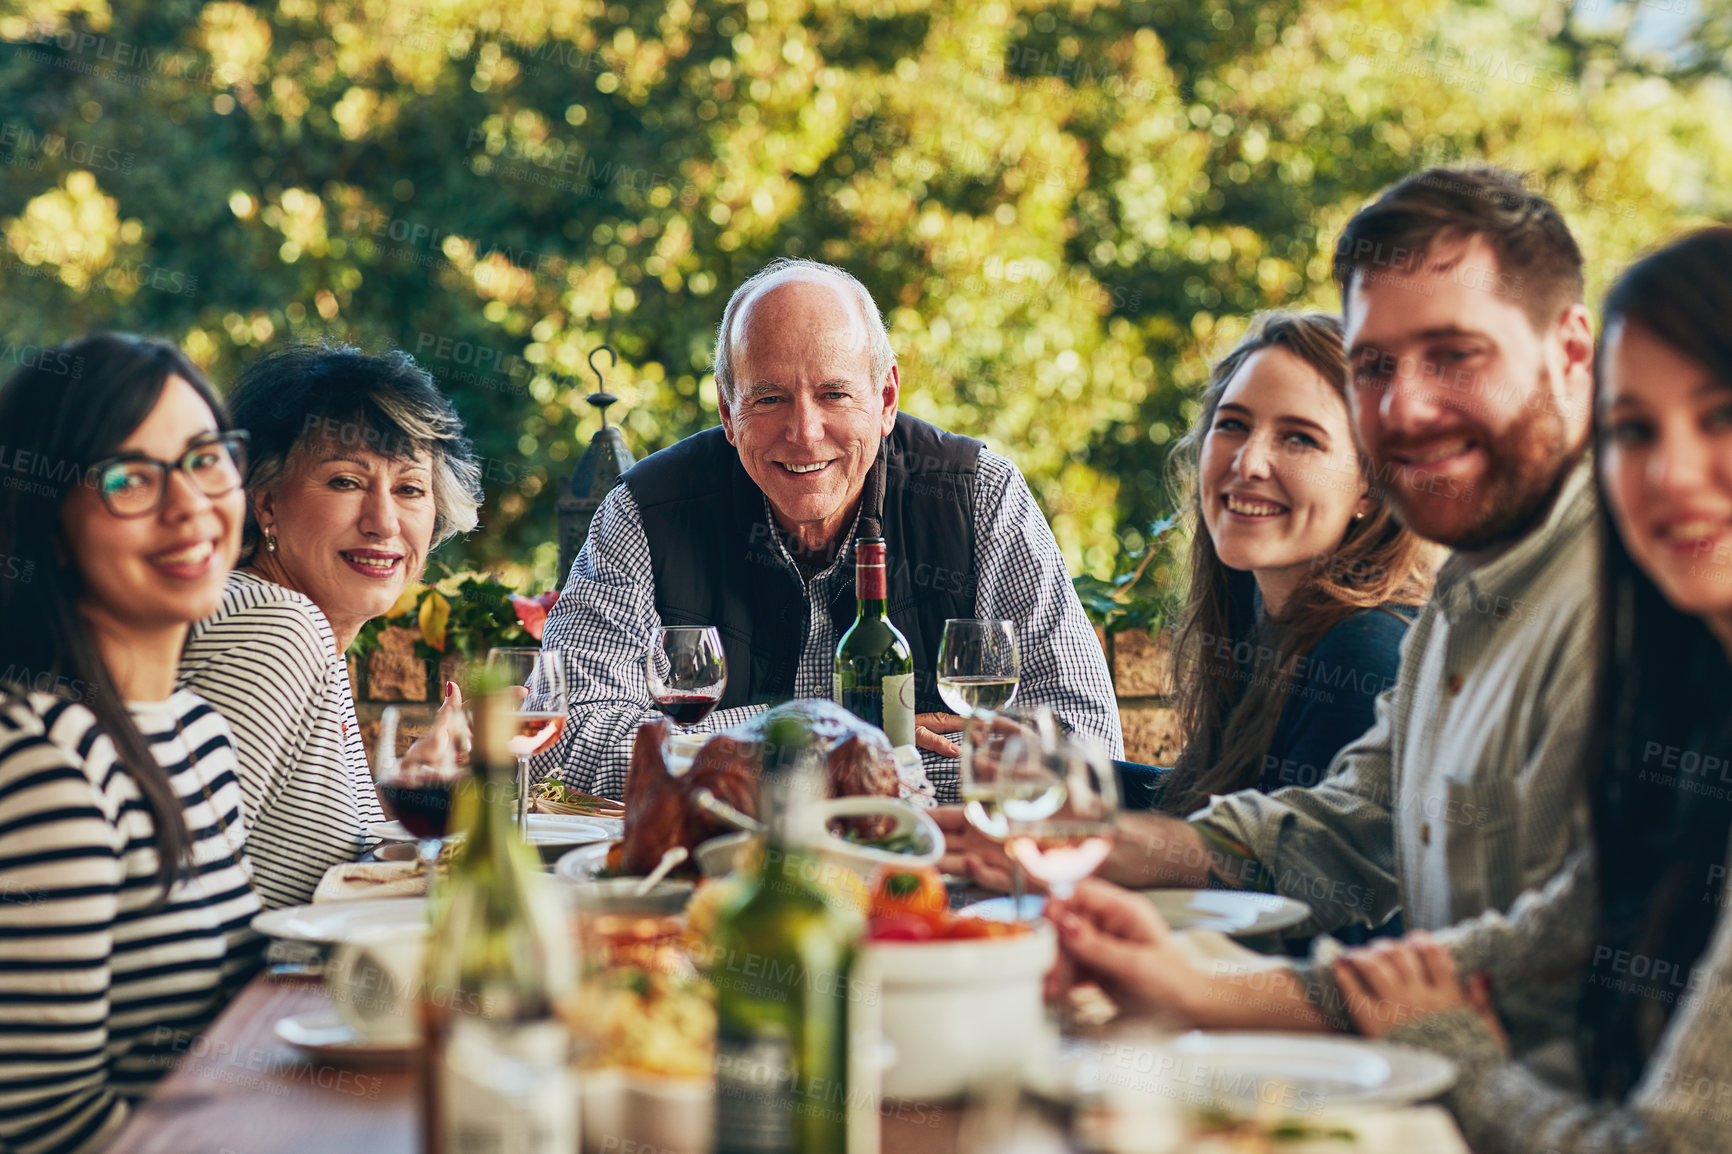 Buy stock photo Cropped shot of a group of people sitting together during a feast at a dining table